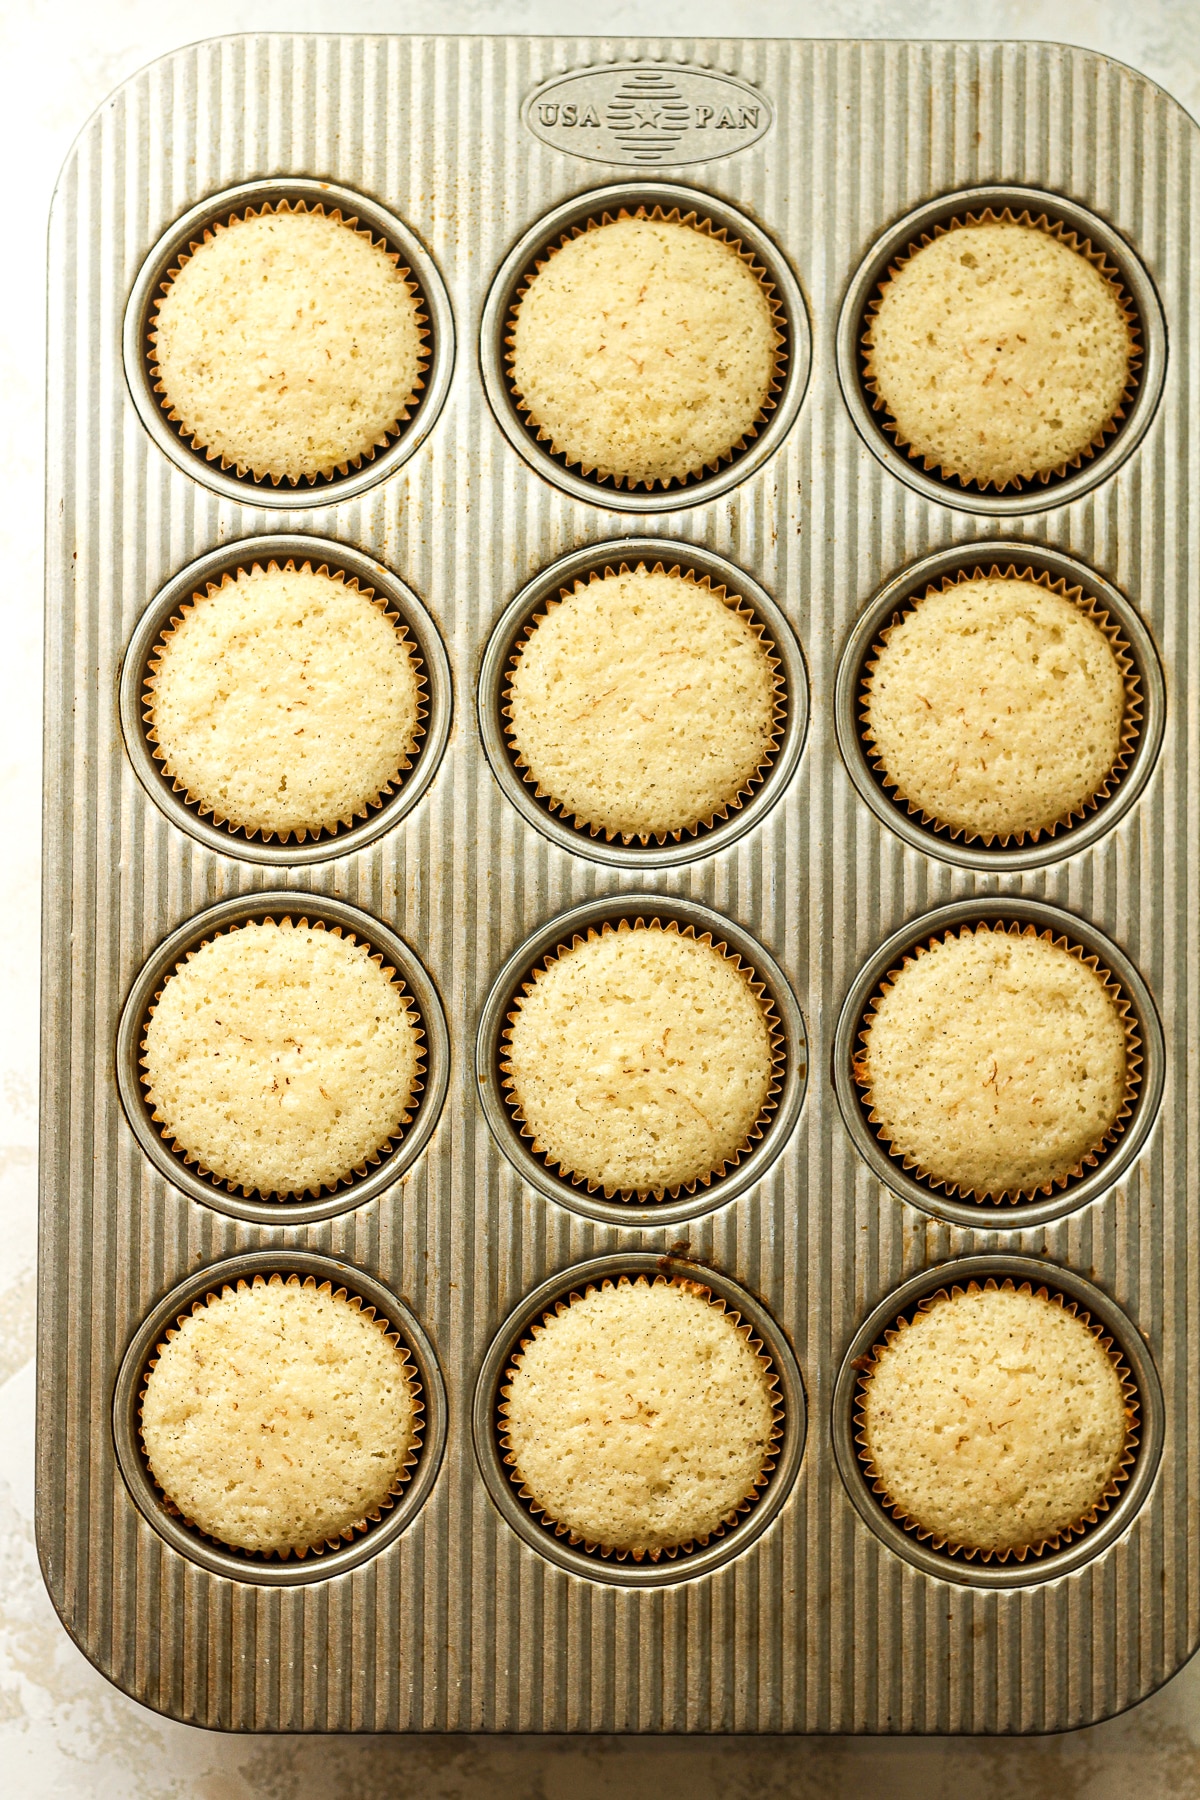 A muffin tin with baked vanilla cupcakes.